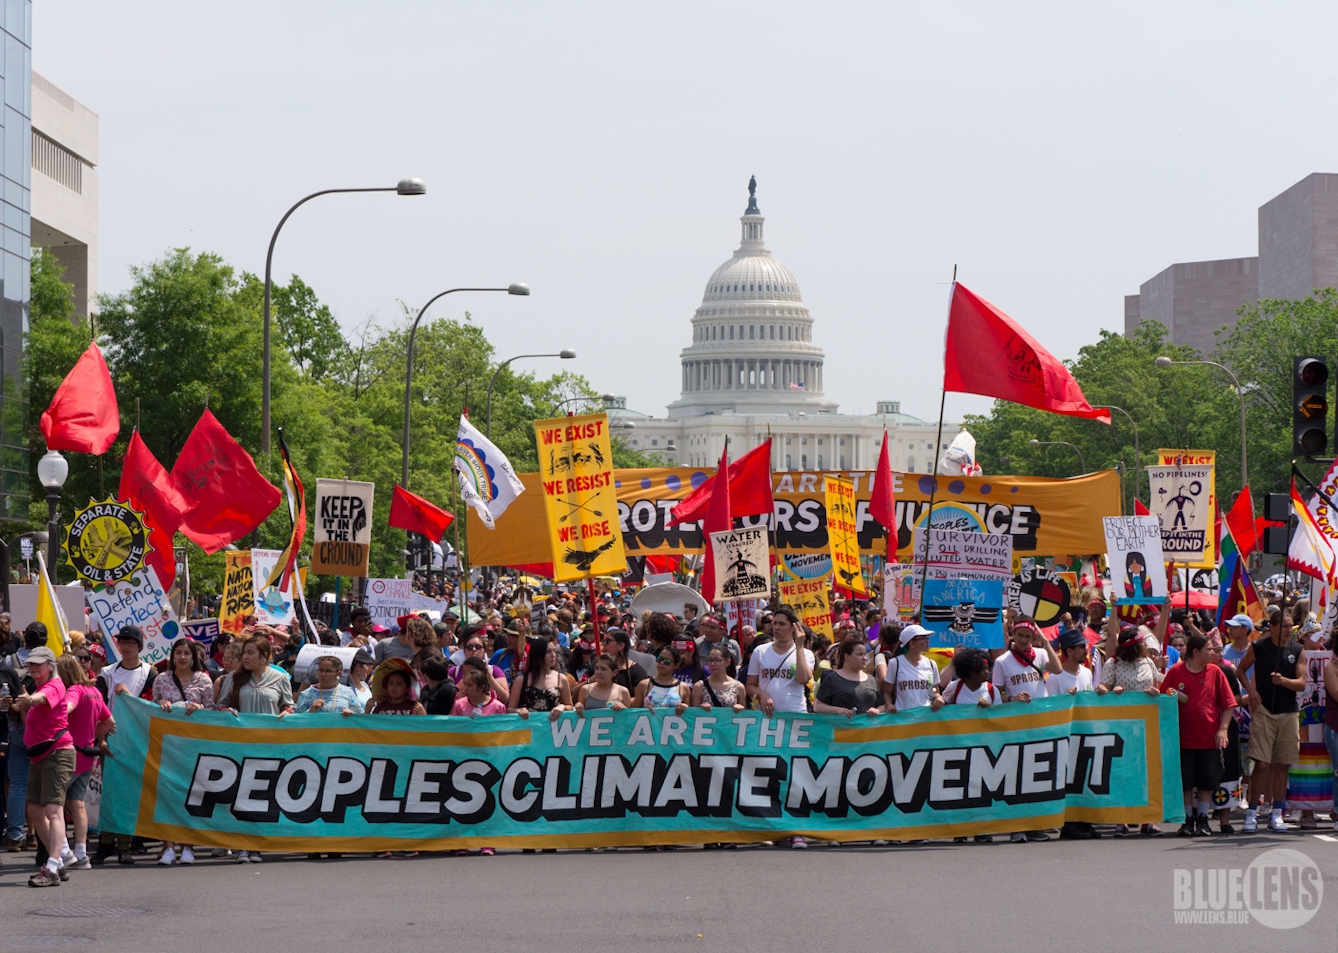 Lots of people holding brightly coloured banners and flags on a climate change march in Washington, with the Capitol building in the background.